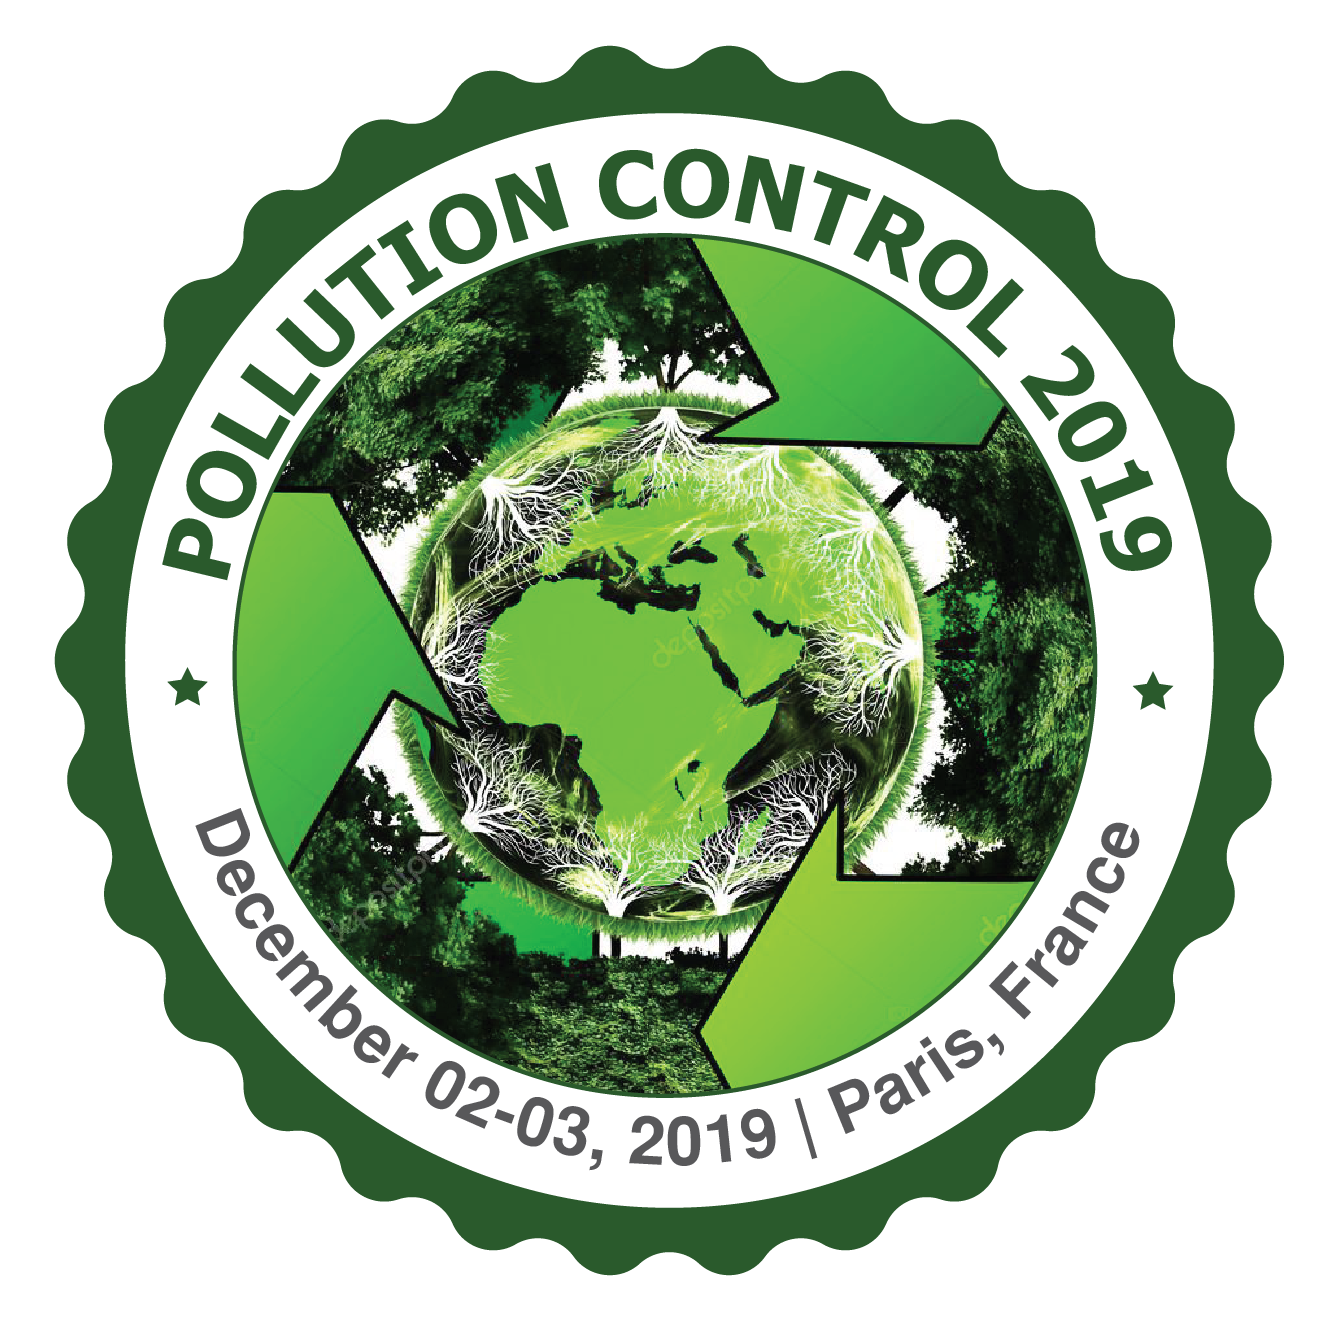 7th Global Summit and Expo on Pollution Control